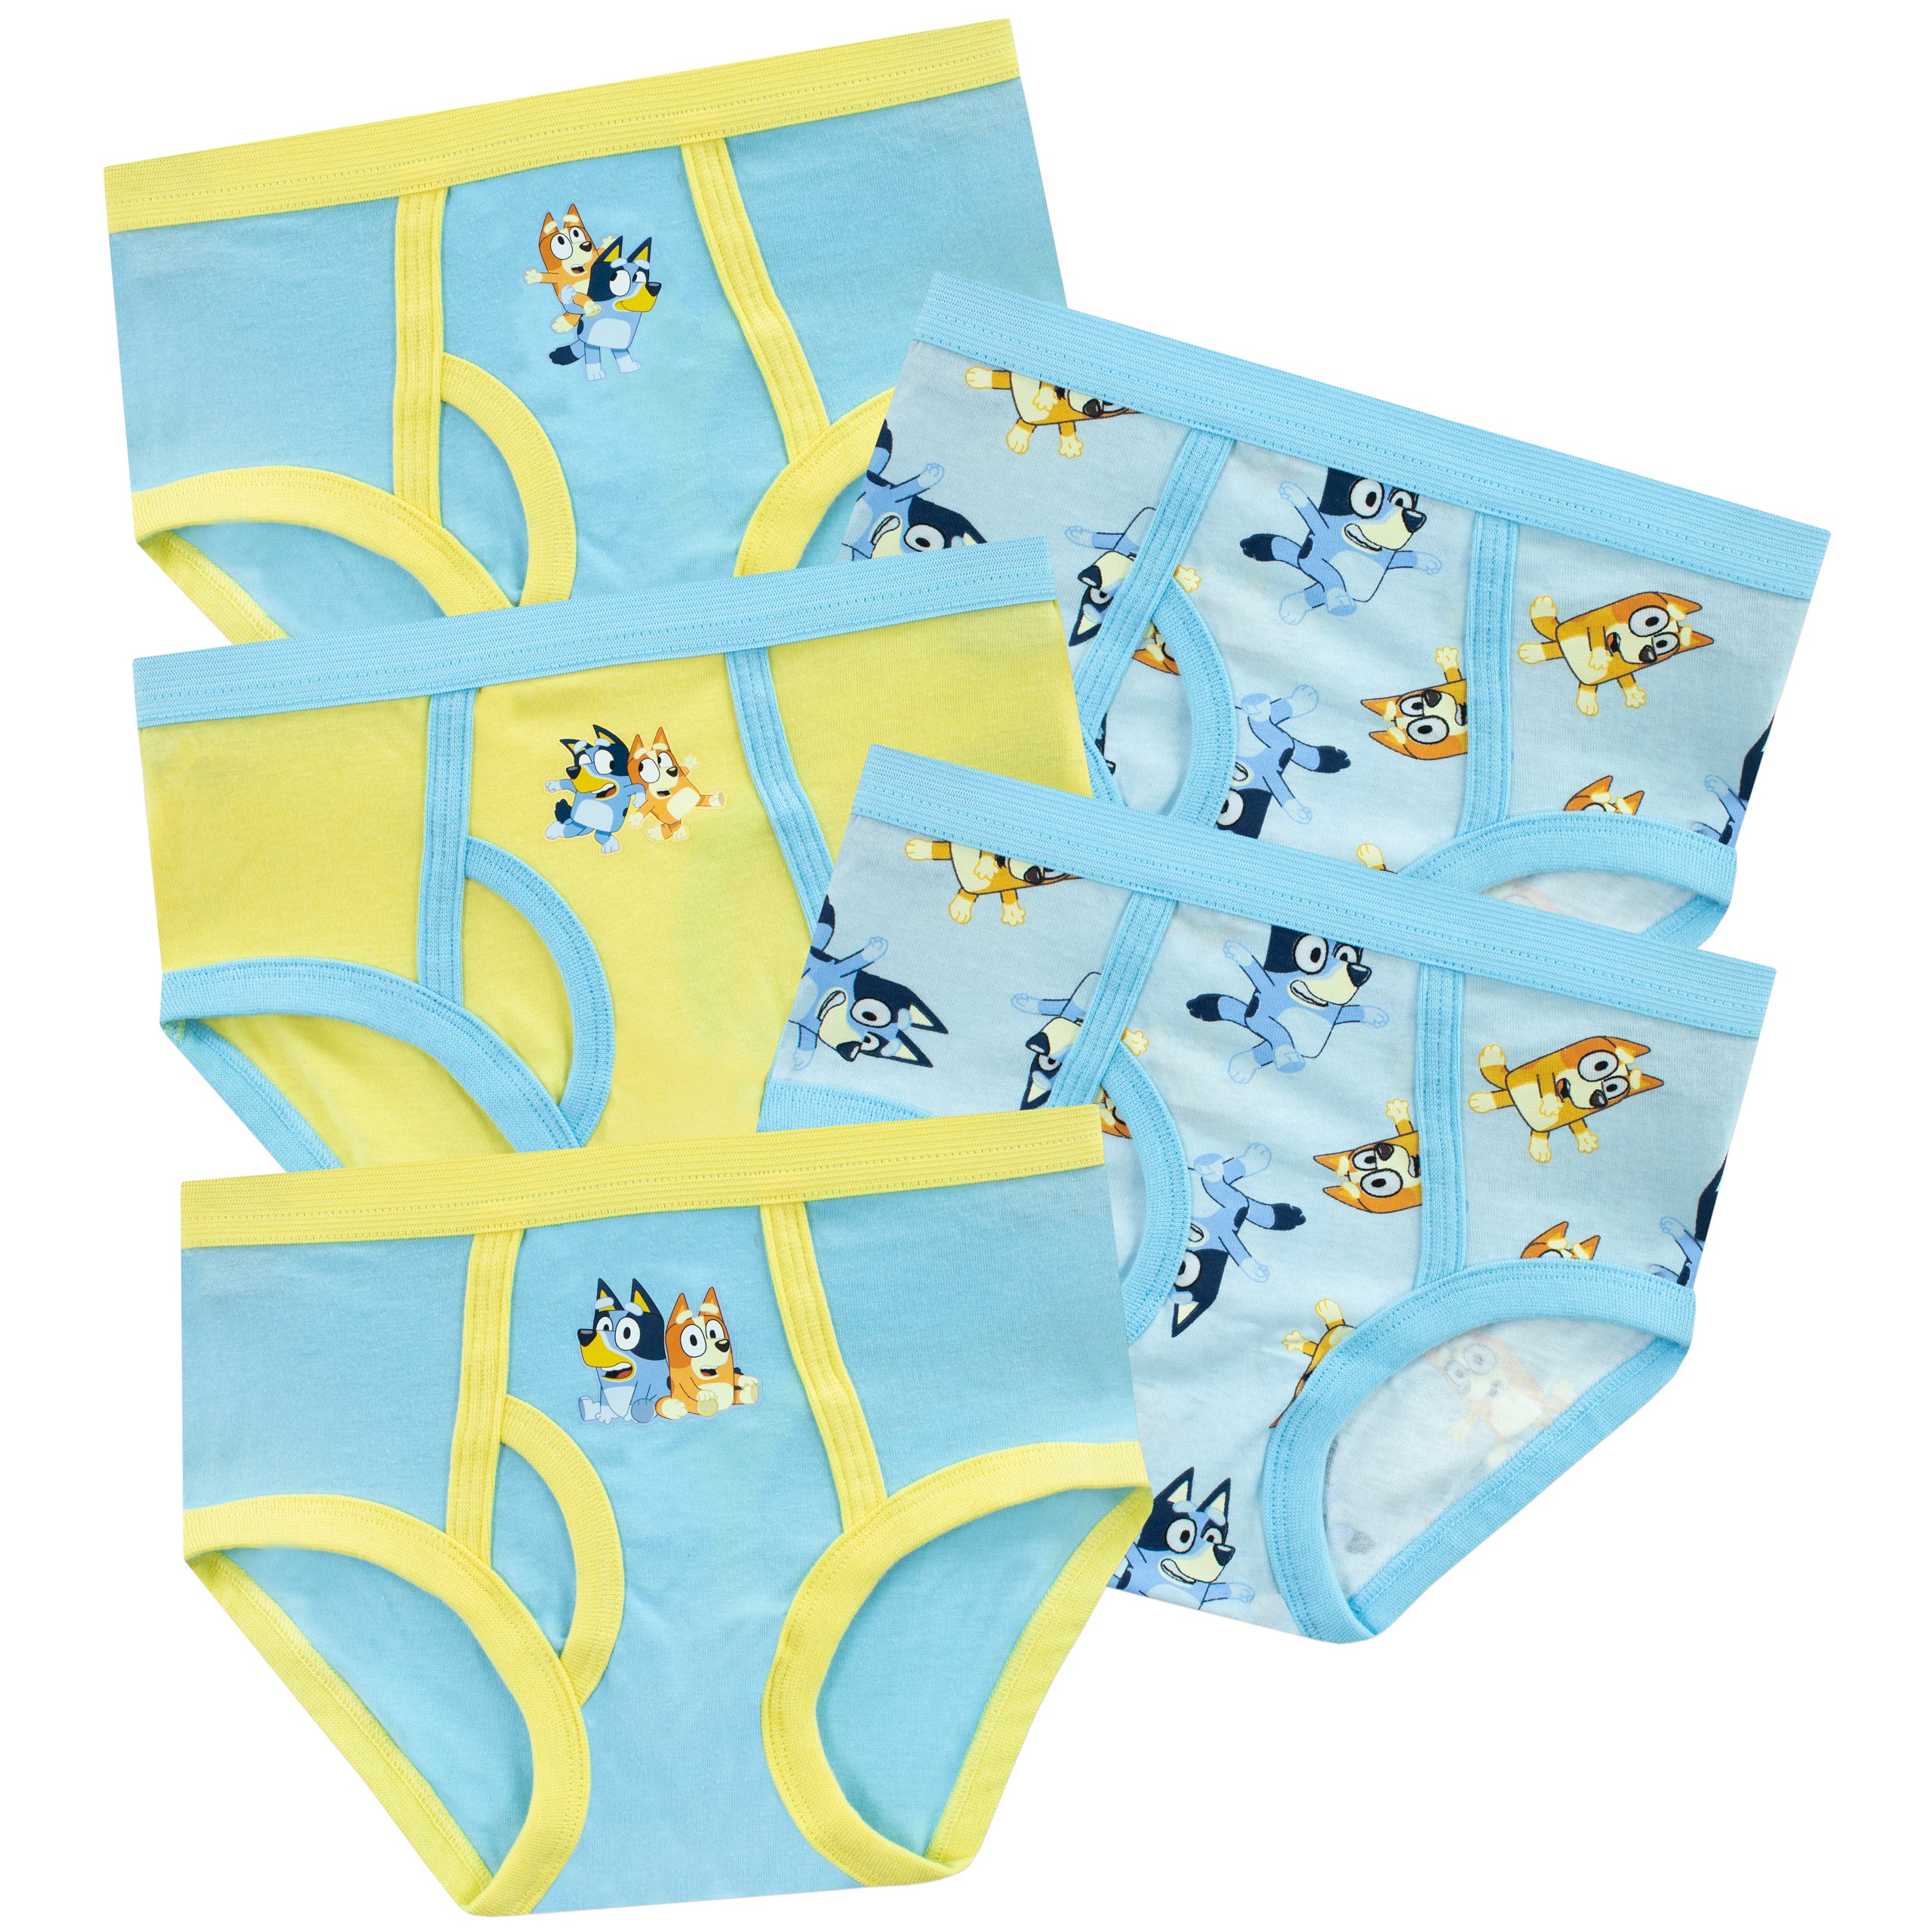 bluey panties  Bluey Girls Knickers Pack of 5, Cotton Underwear for Girls